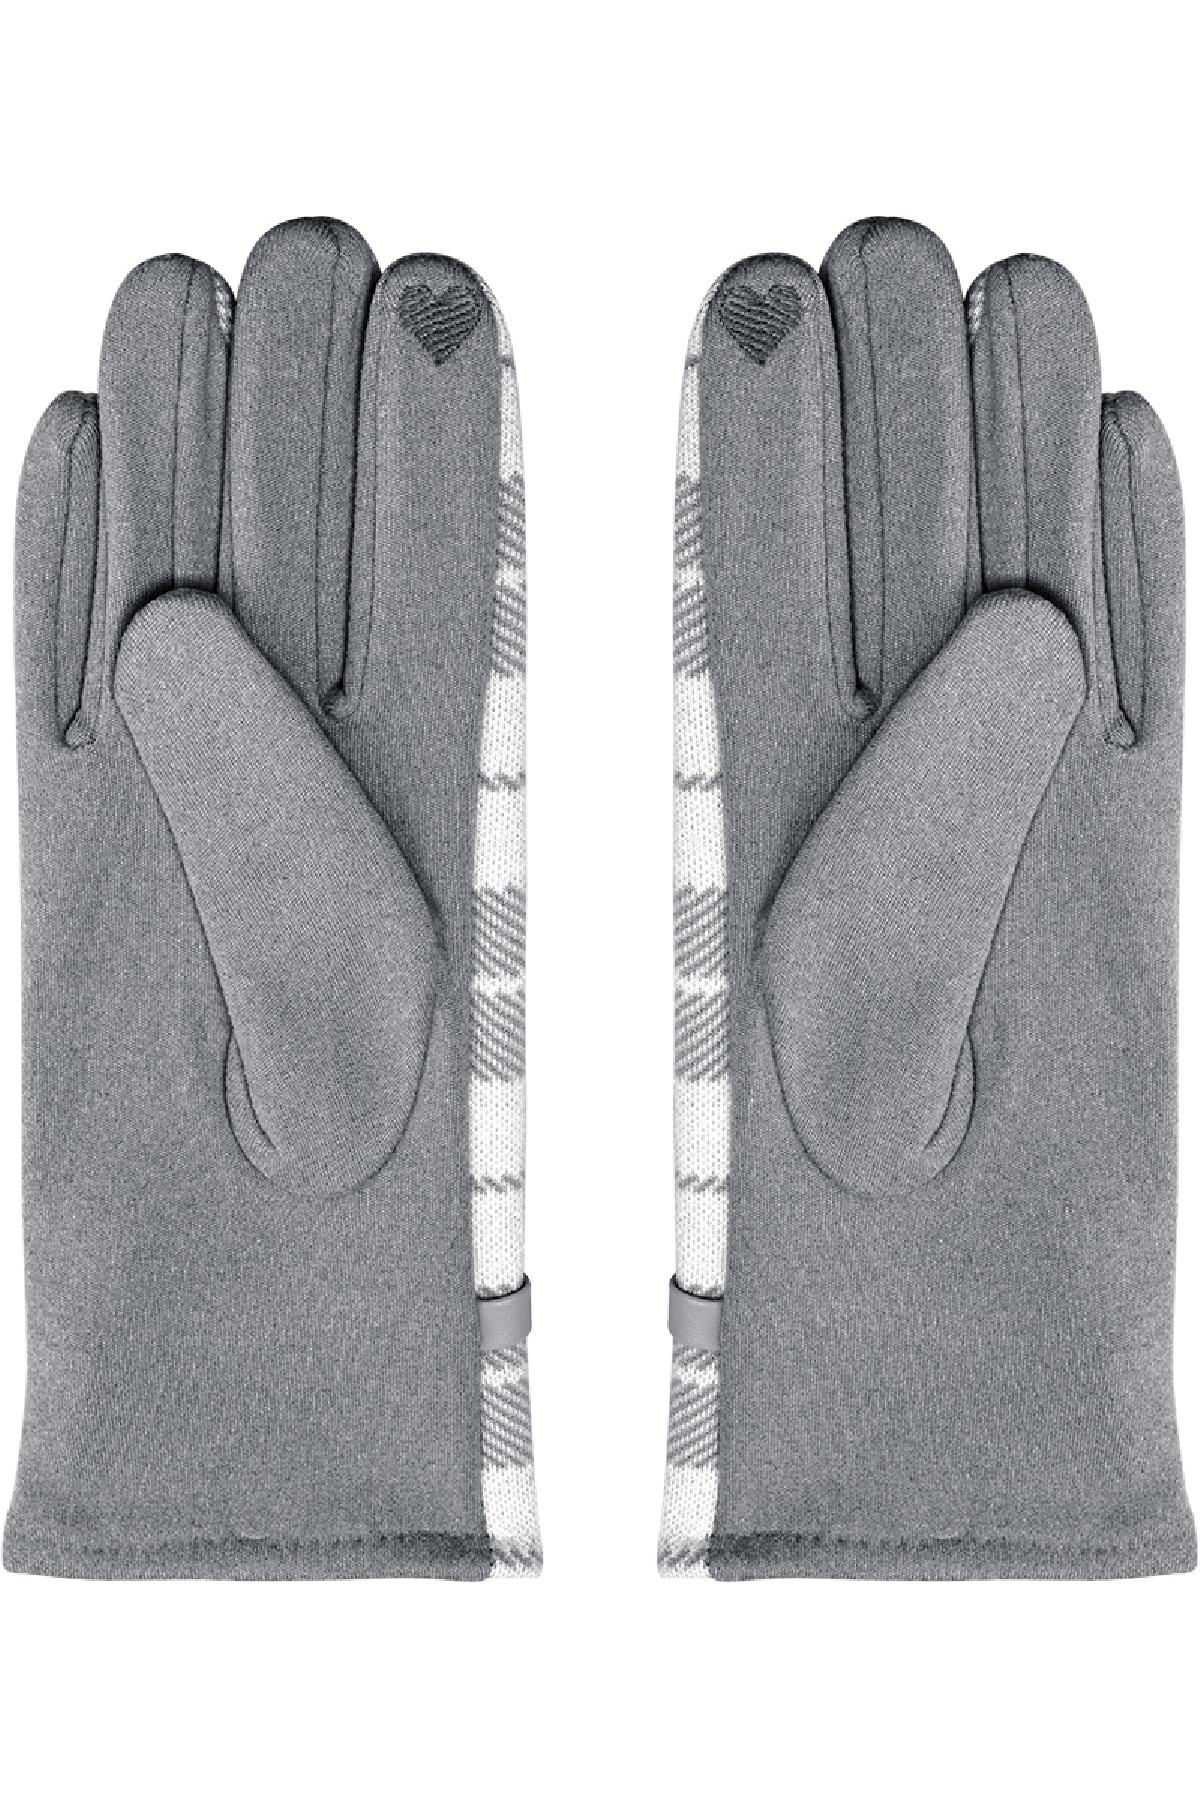 Checkered gloves Grey Polyester One size h5 Picture4